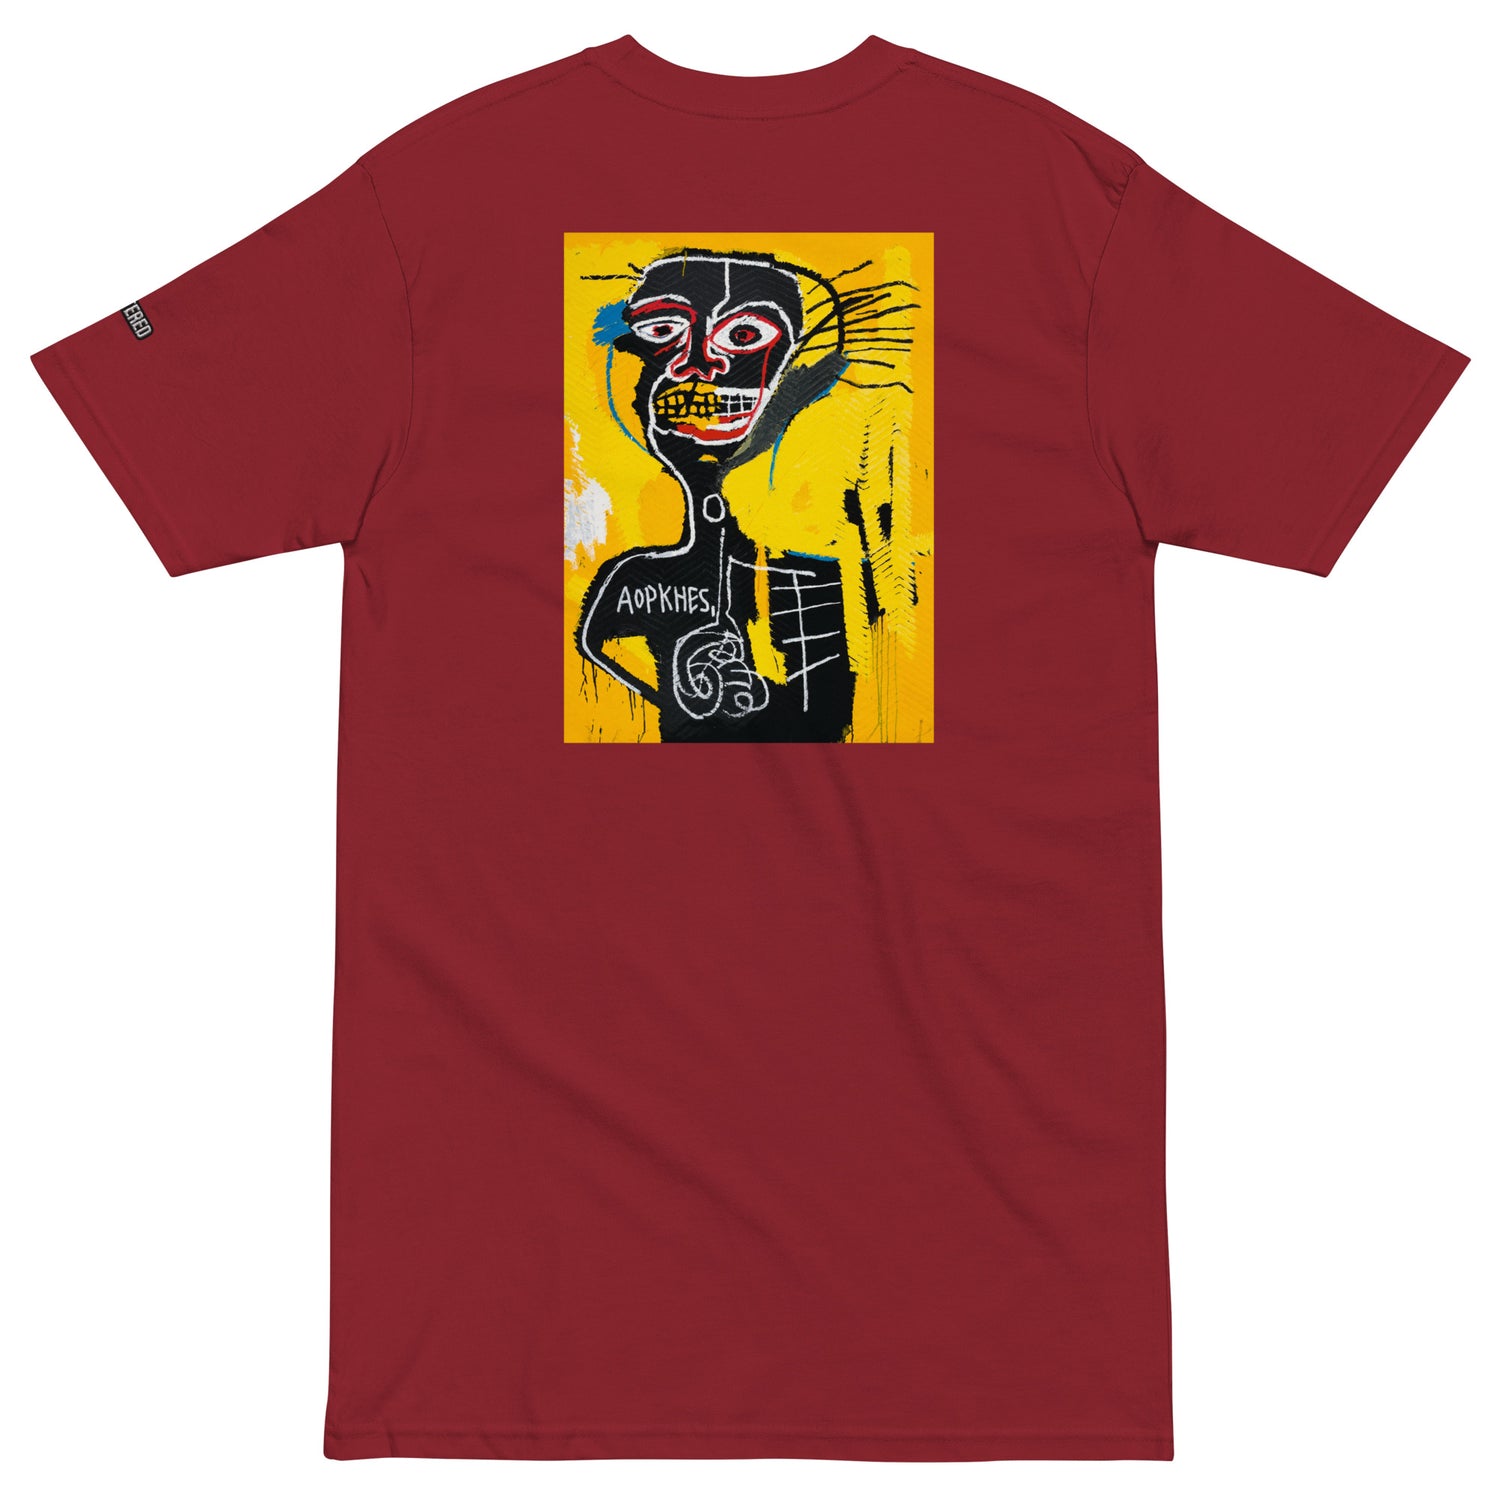 Jean-Michel Basquiat "Cabeza" Artwork Embroidered + Printed Premium Red Streetwear T-shirt Scattered